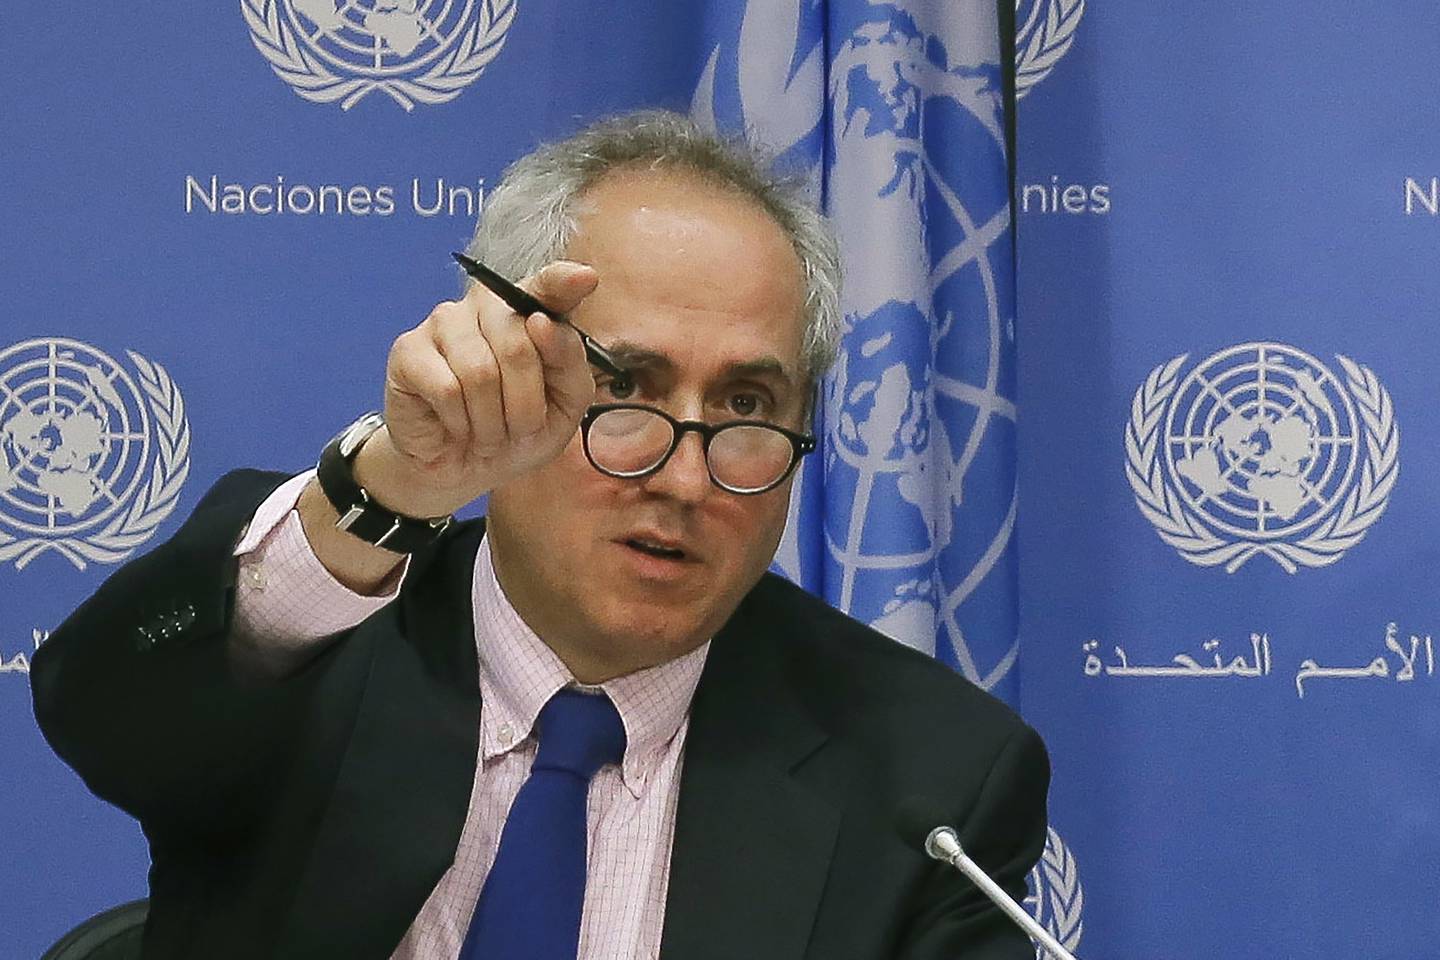 UN spokesman Stephane Dujarric said nothing could be solved until all leaders talk. AP